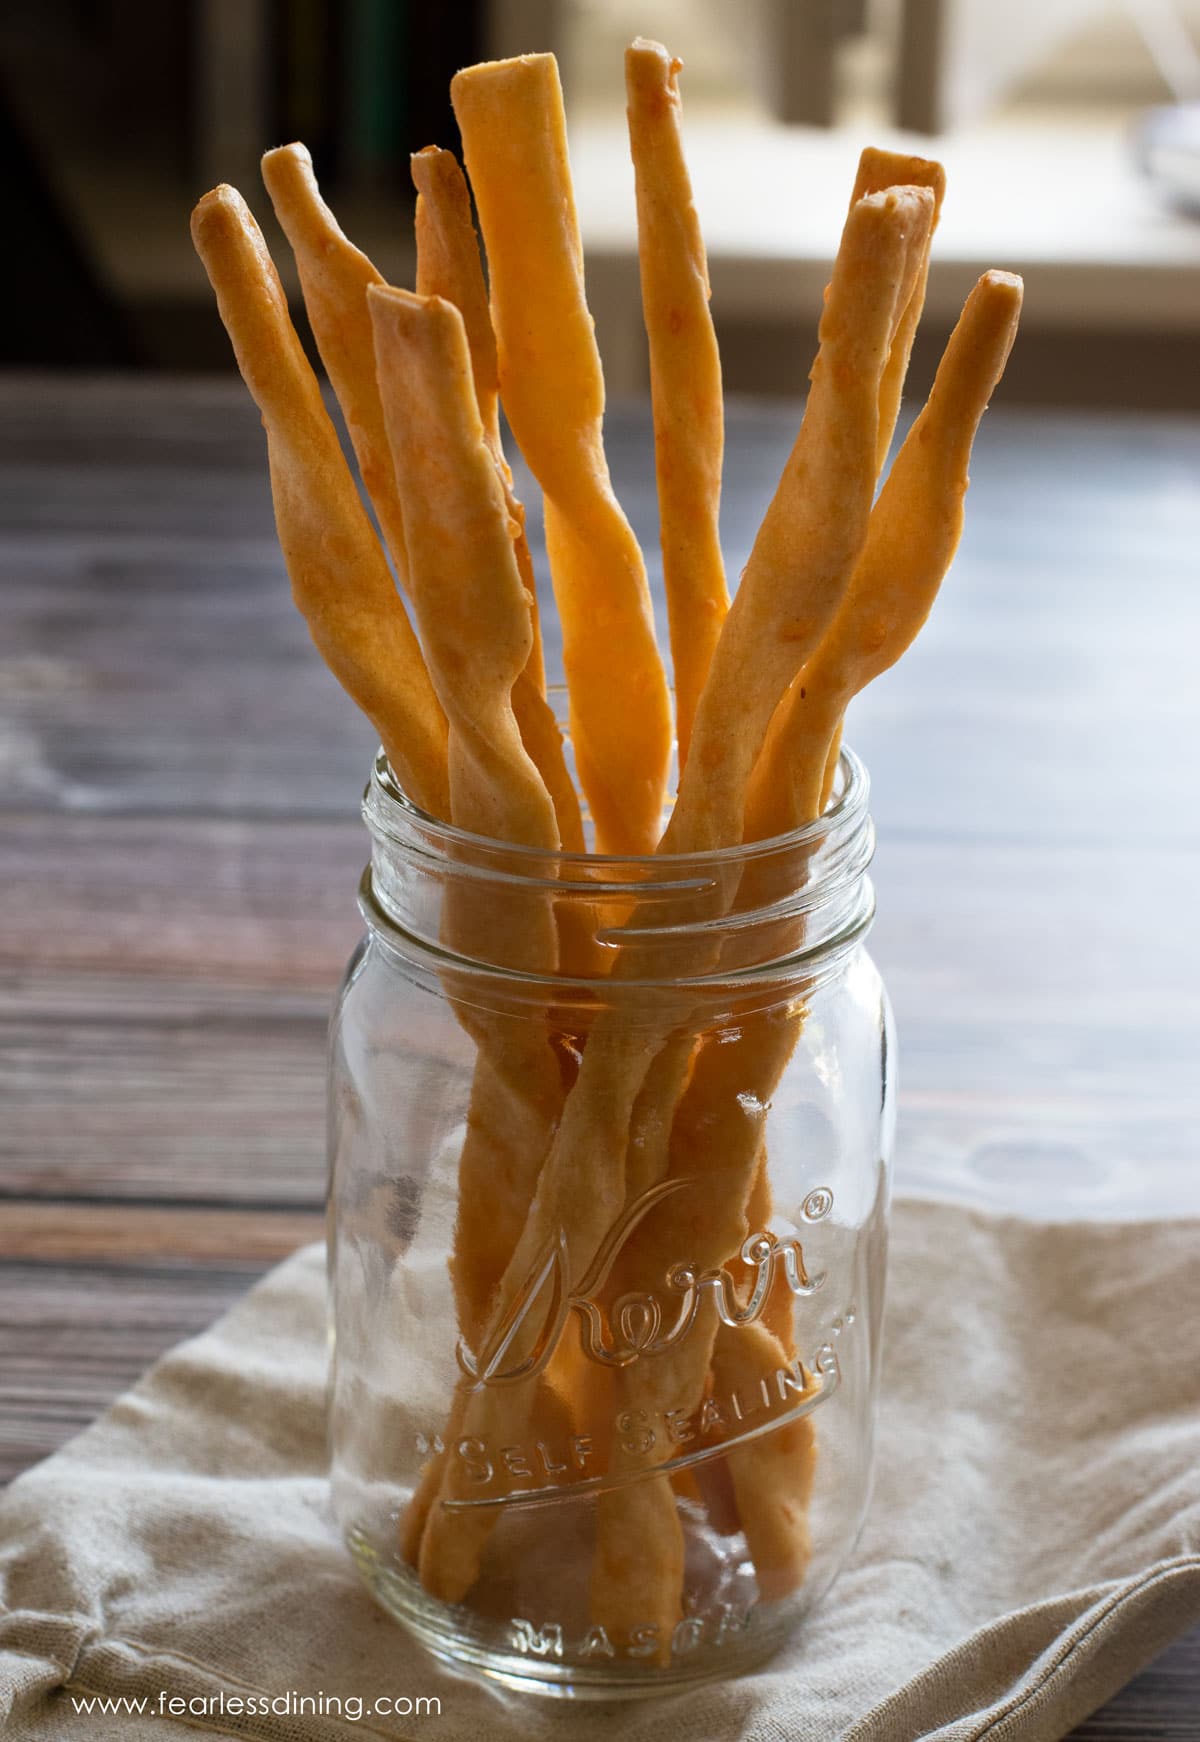 A jar filled with crispy gluten free cheese straws.